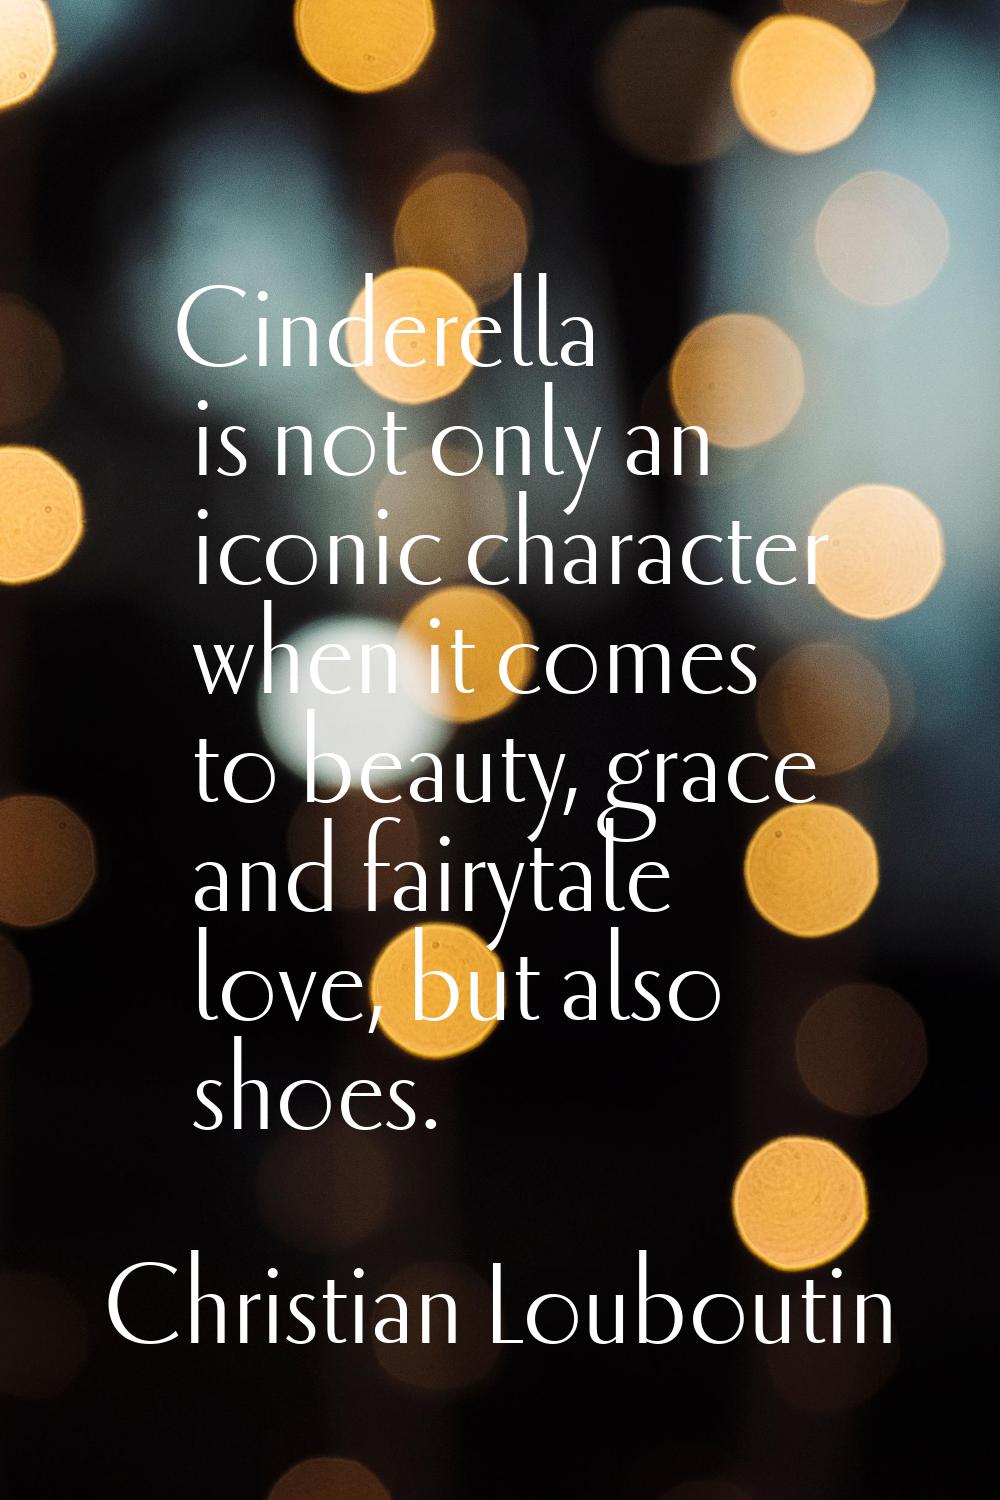 Cinderella is not only an iconic character when it comes to beauty, grace and fairytale love, but a